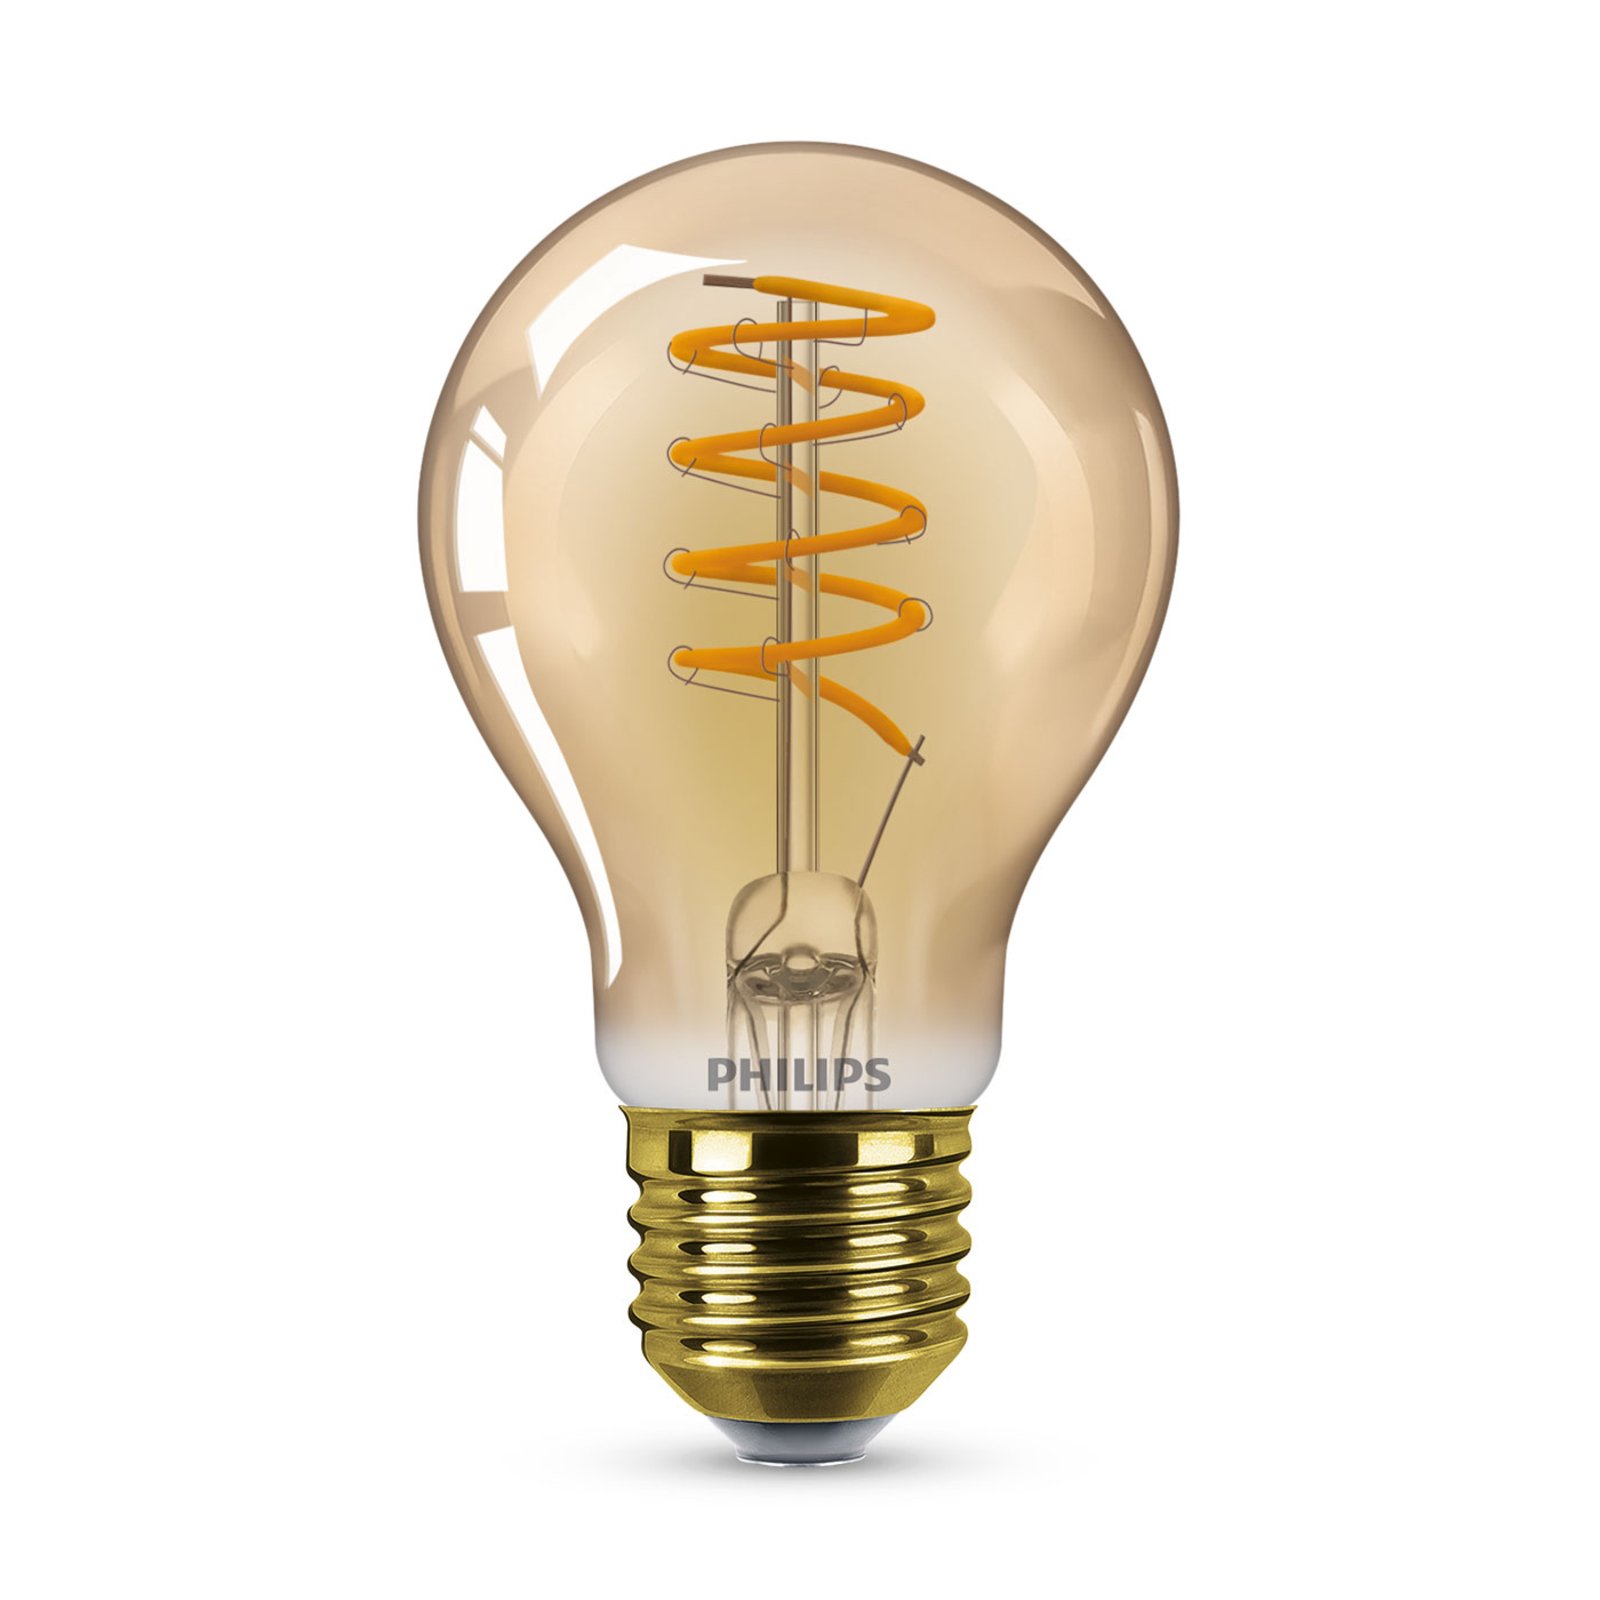 Philips LED bulb E27 A60 4 W 1,800 K gold dimmable